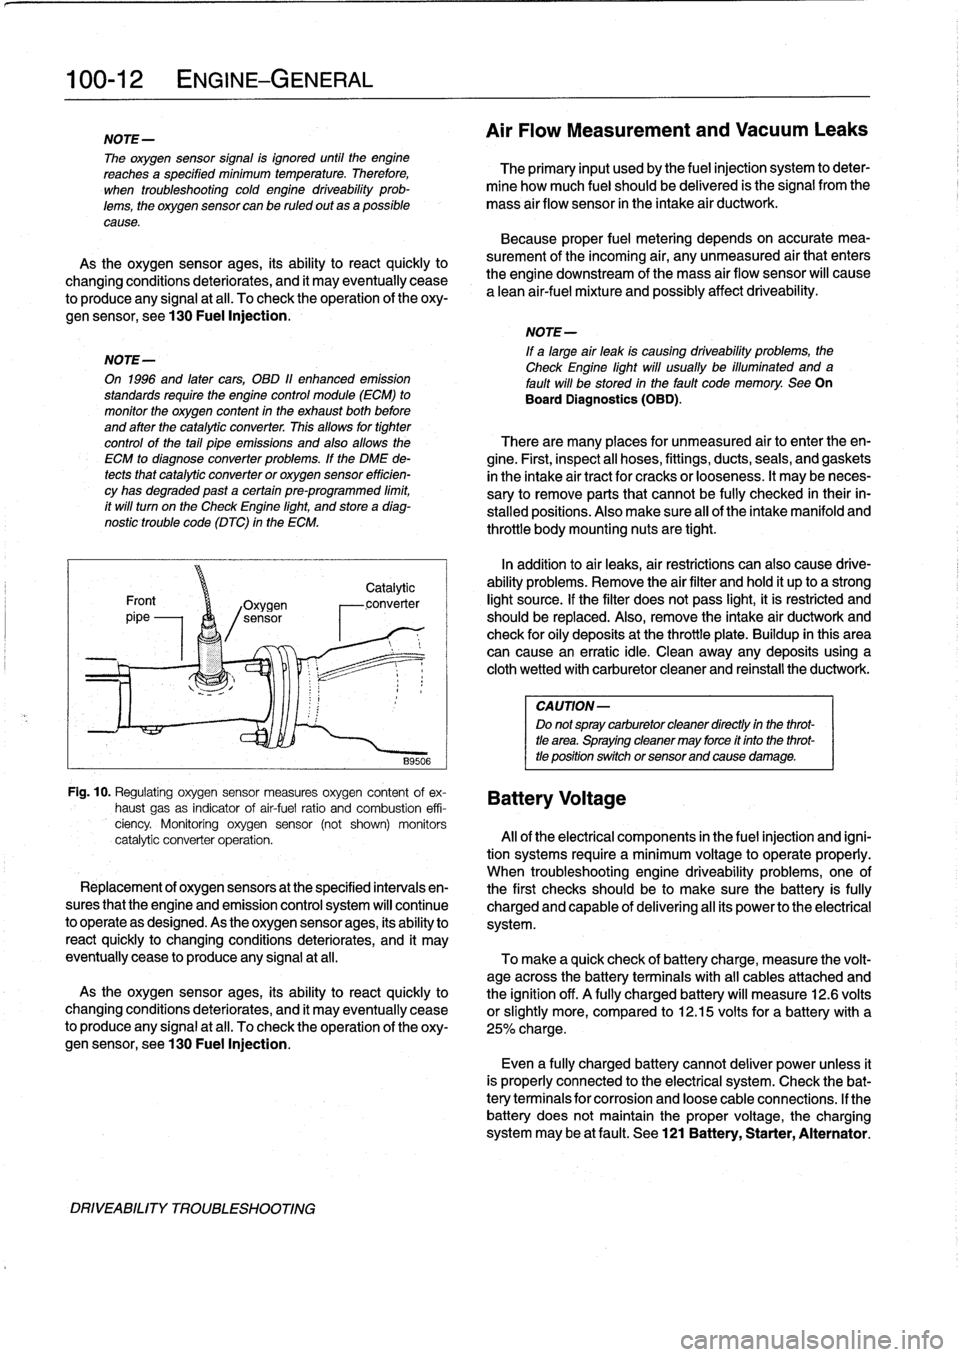 BMW 328i 1995 E36 Workshop Manual 
100-
1
2
ENGINE-GENERAL

NOTE-

The
oxygen
sensor
signal
is
ignored
until
the
engine
reachesa
specified
minimum
temperature
.
Therefore,

	

The
primary
input
usedby
the
fuel
injection
system
to
dete